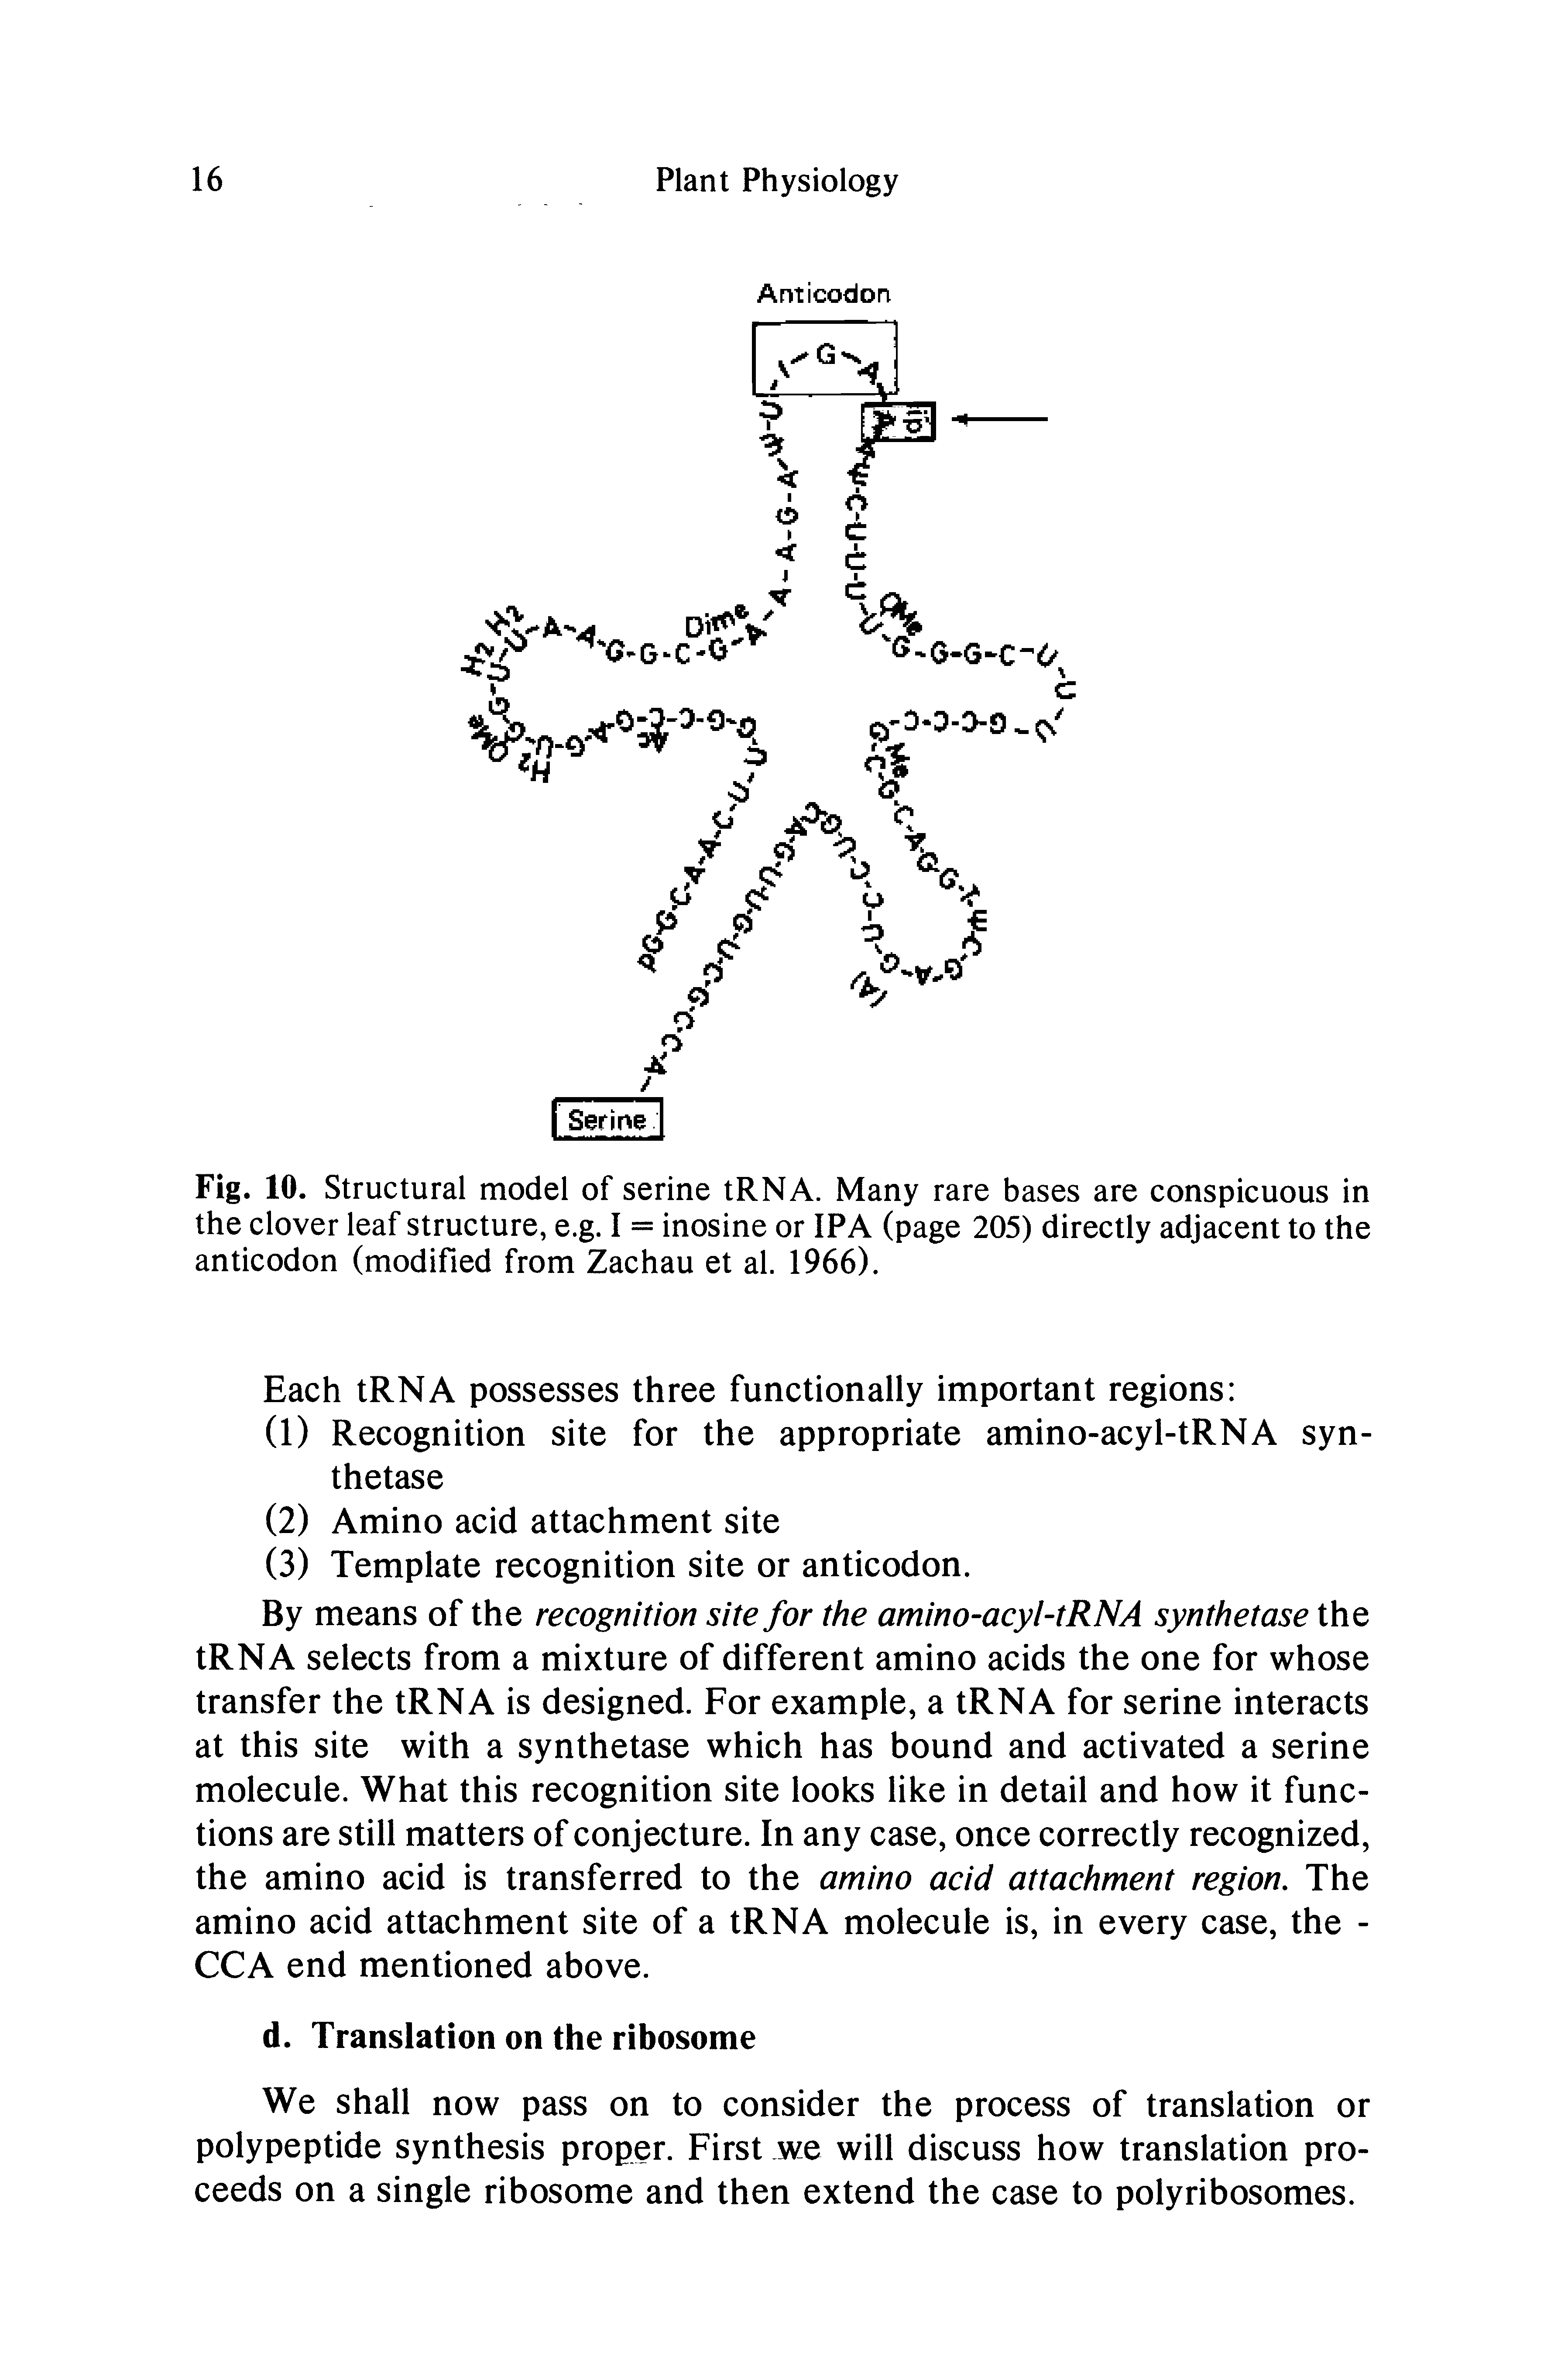 Fig. 10. Structural model of serine tRNA. Many rare bases are conspicuous in the clover leaf structure, e.g. I = inosine or IPA (page 205) directly adjacent to the anticodon (modified from Zachau et al. 1966).